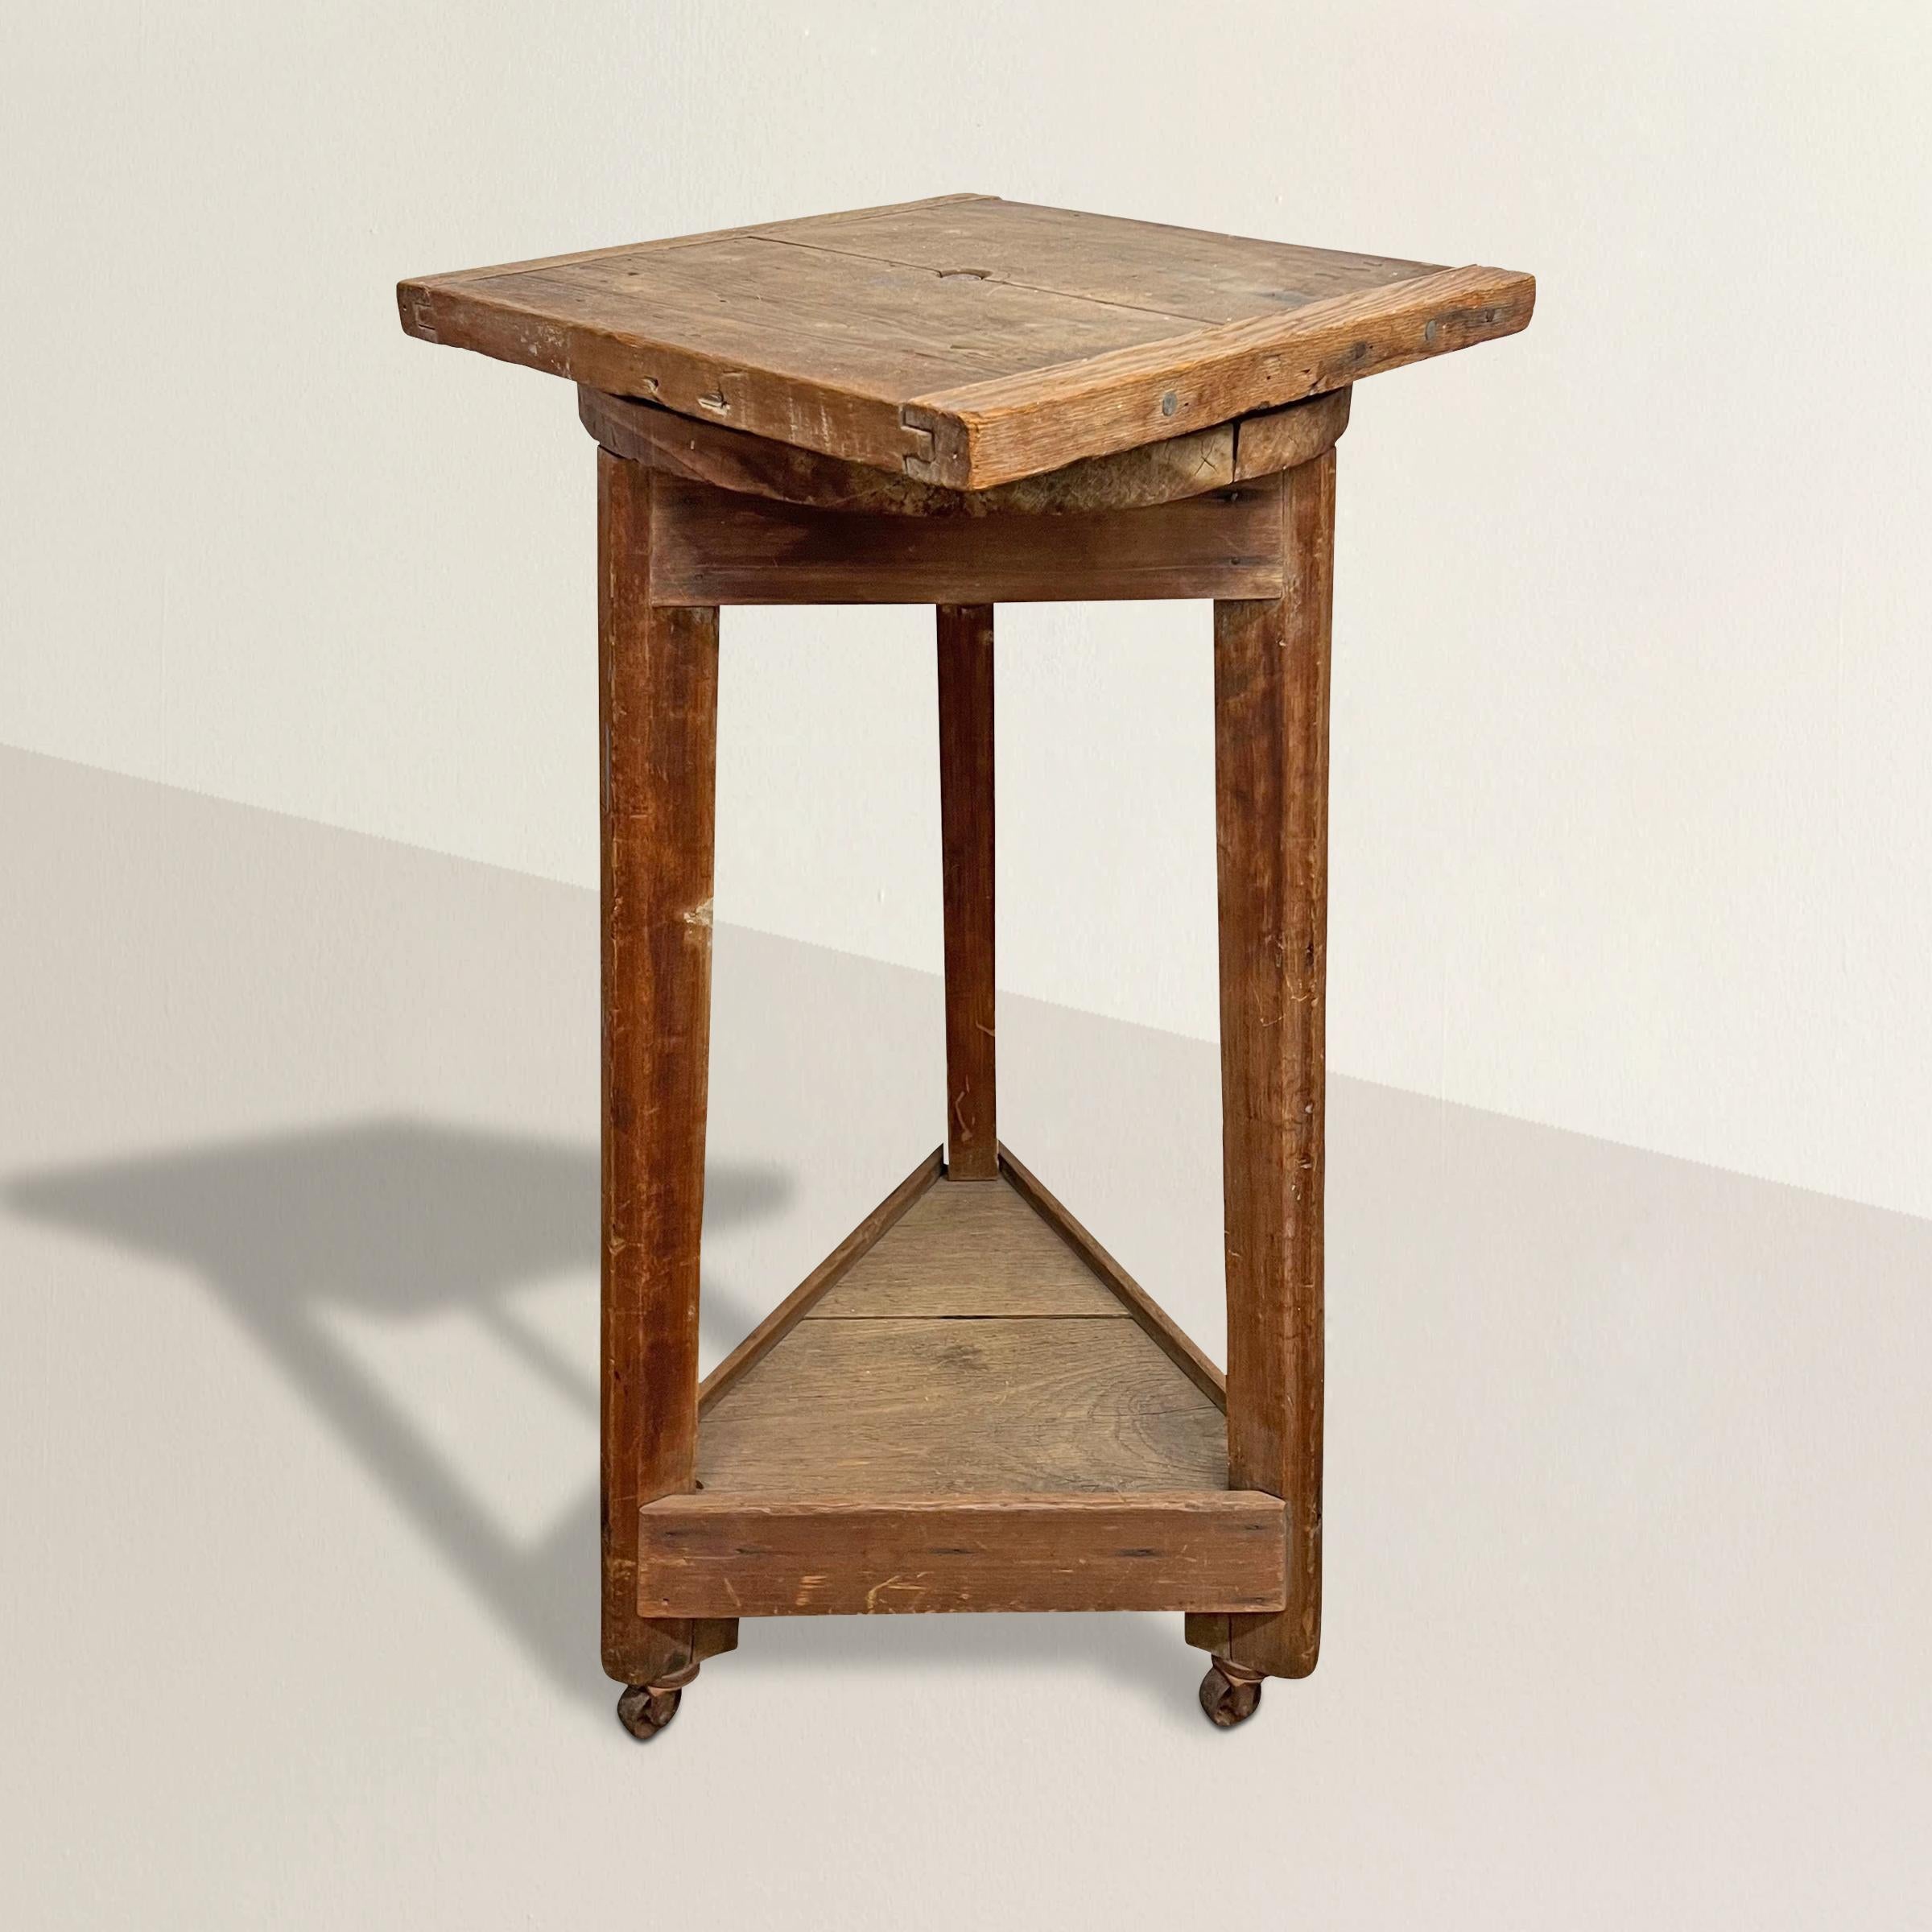 A wonderful 19th century French oak and pine sculptor's stand with a top that rotates around a peg, and a shelf at the bottom originally used to store the artist's tools. Today is the perfect pedestal to display your favorite sculpture or piece of